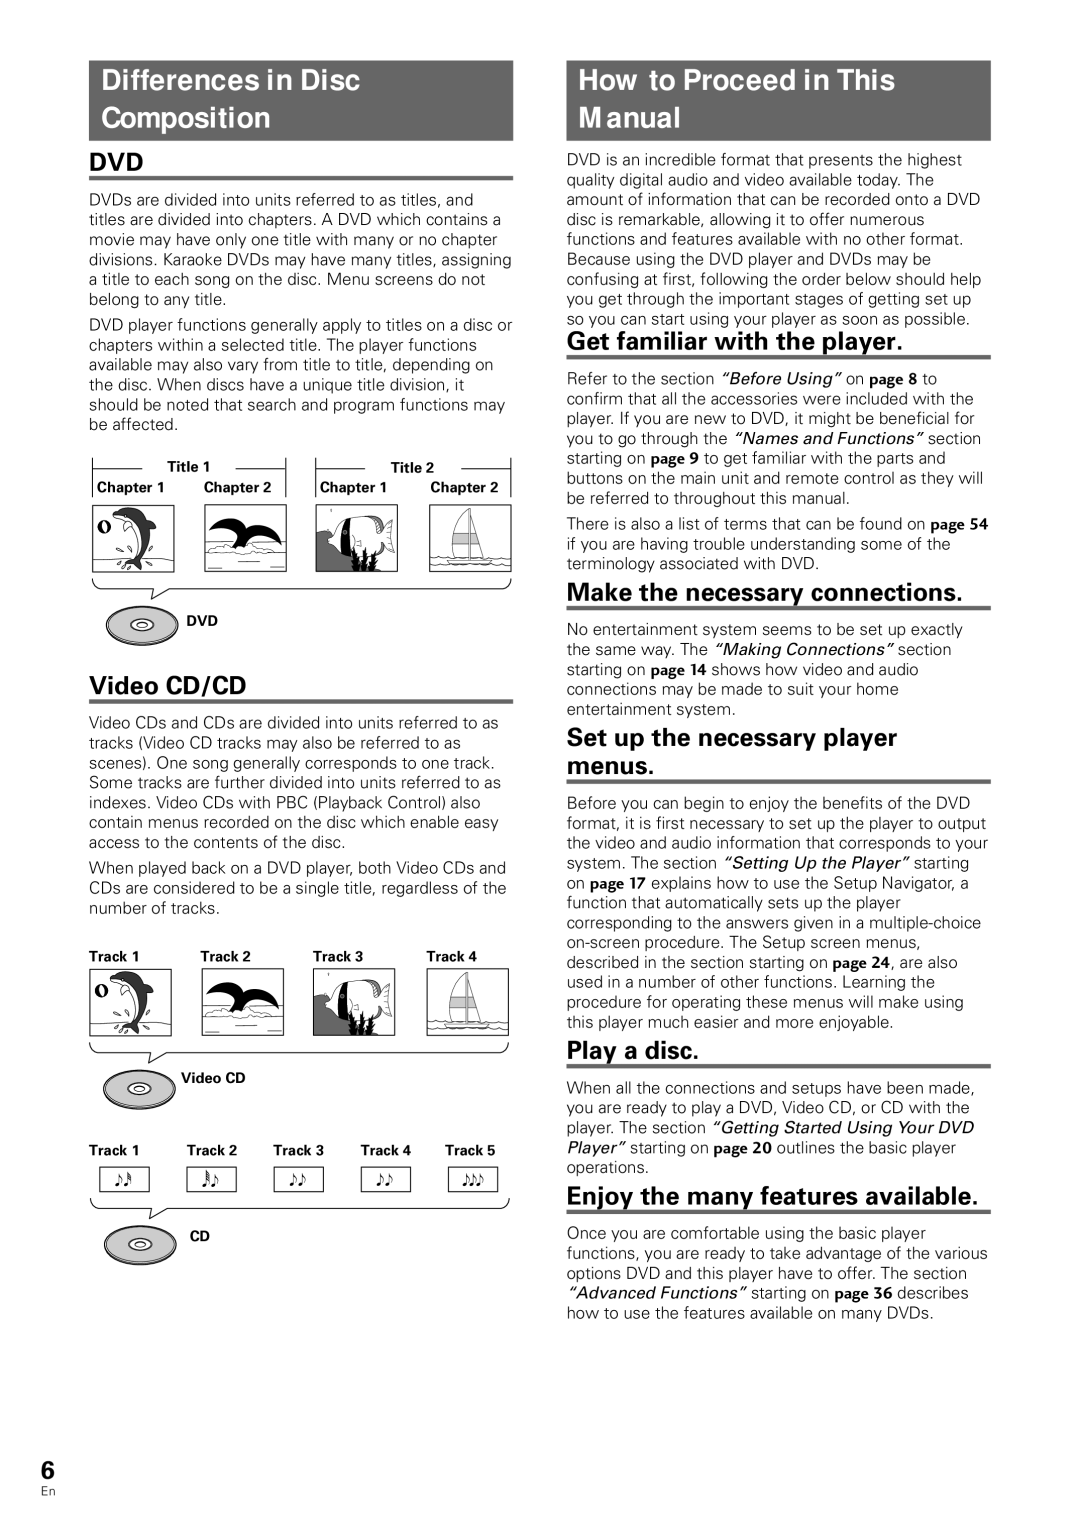 Pioneer DV-343 Differences in Disc Composition, How to Proceed in This Manual, Video CD/CD, Get familiar with the player 